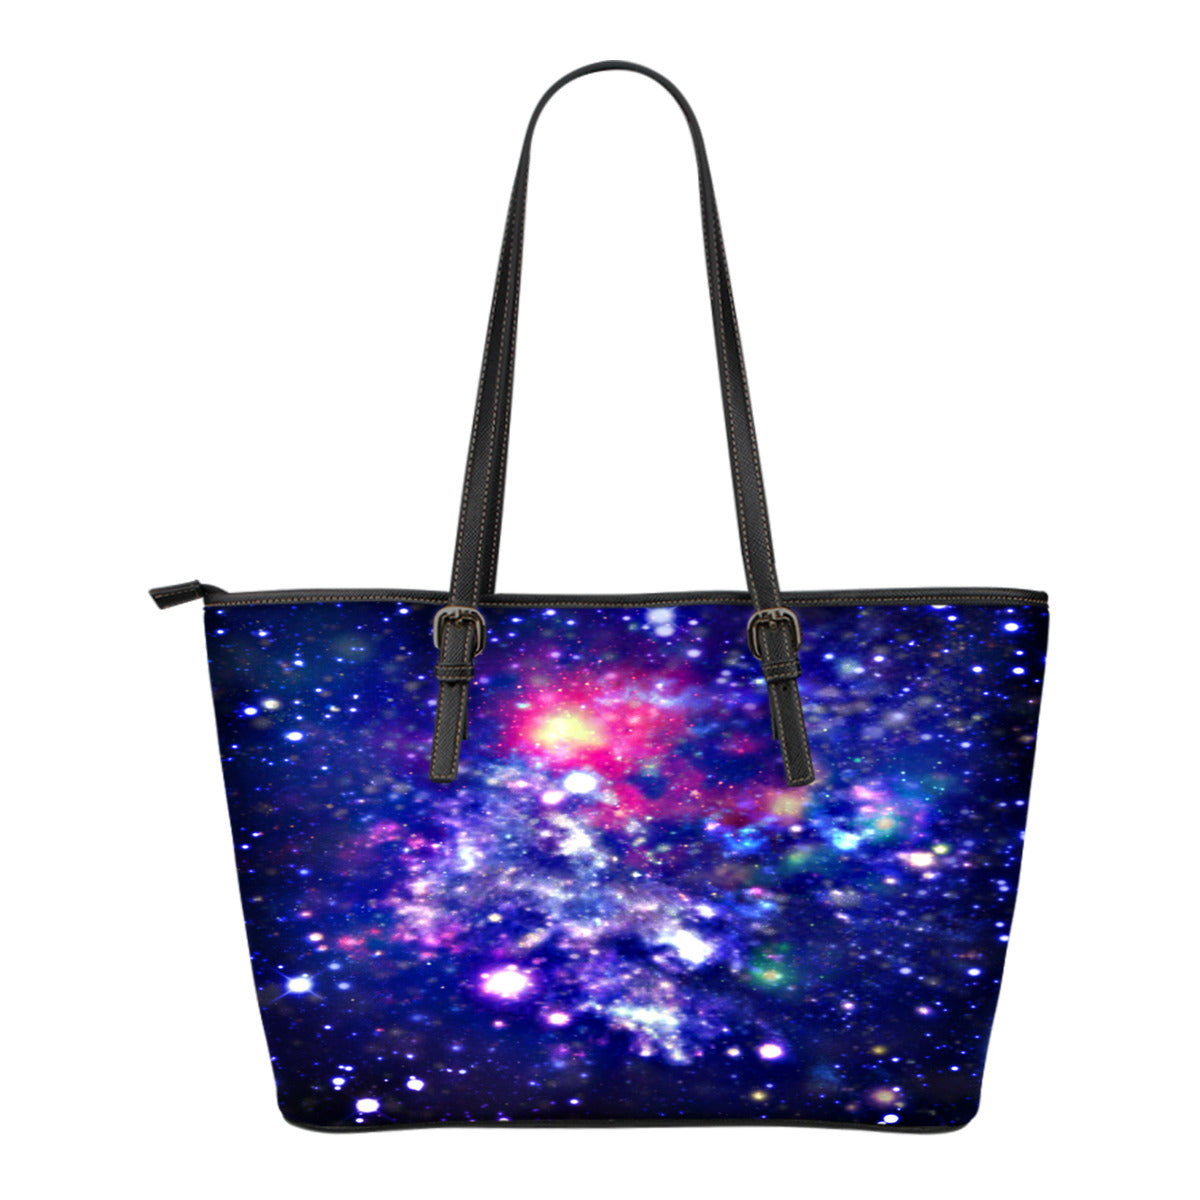 Galaxy Themed Design C1 Women Small Leather Tote Bag